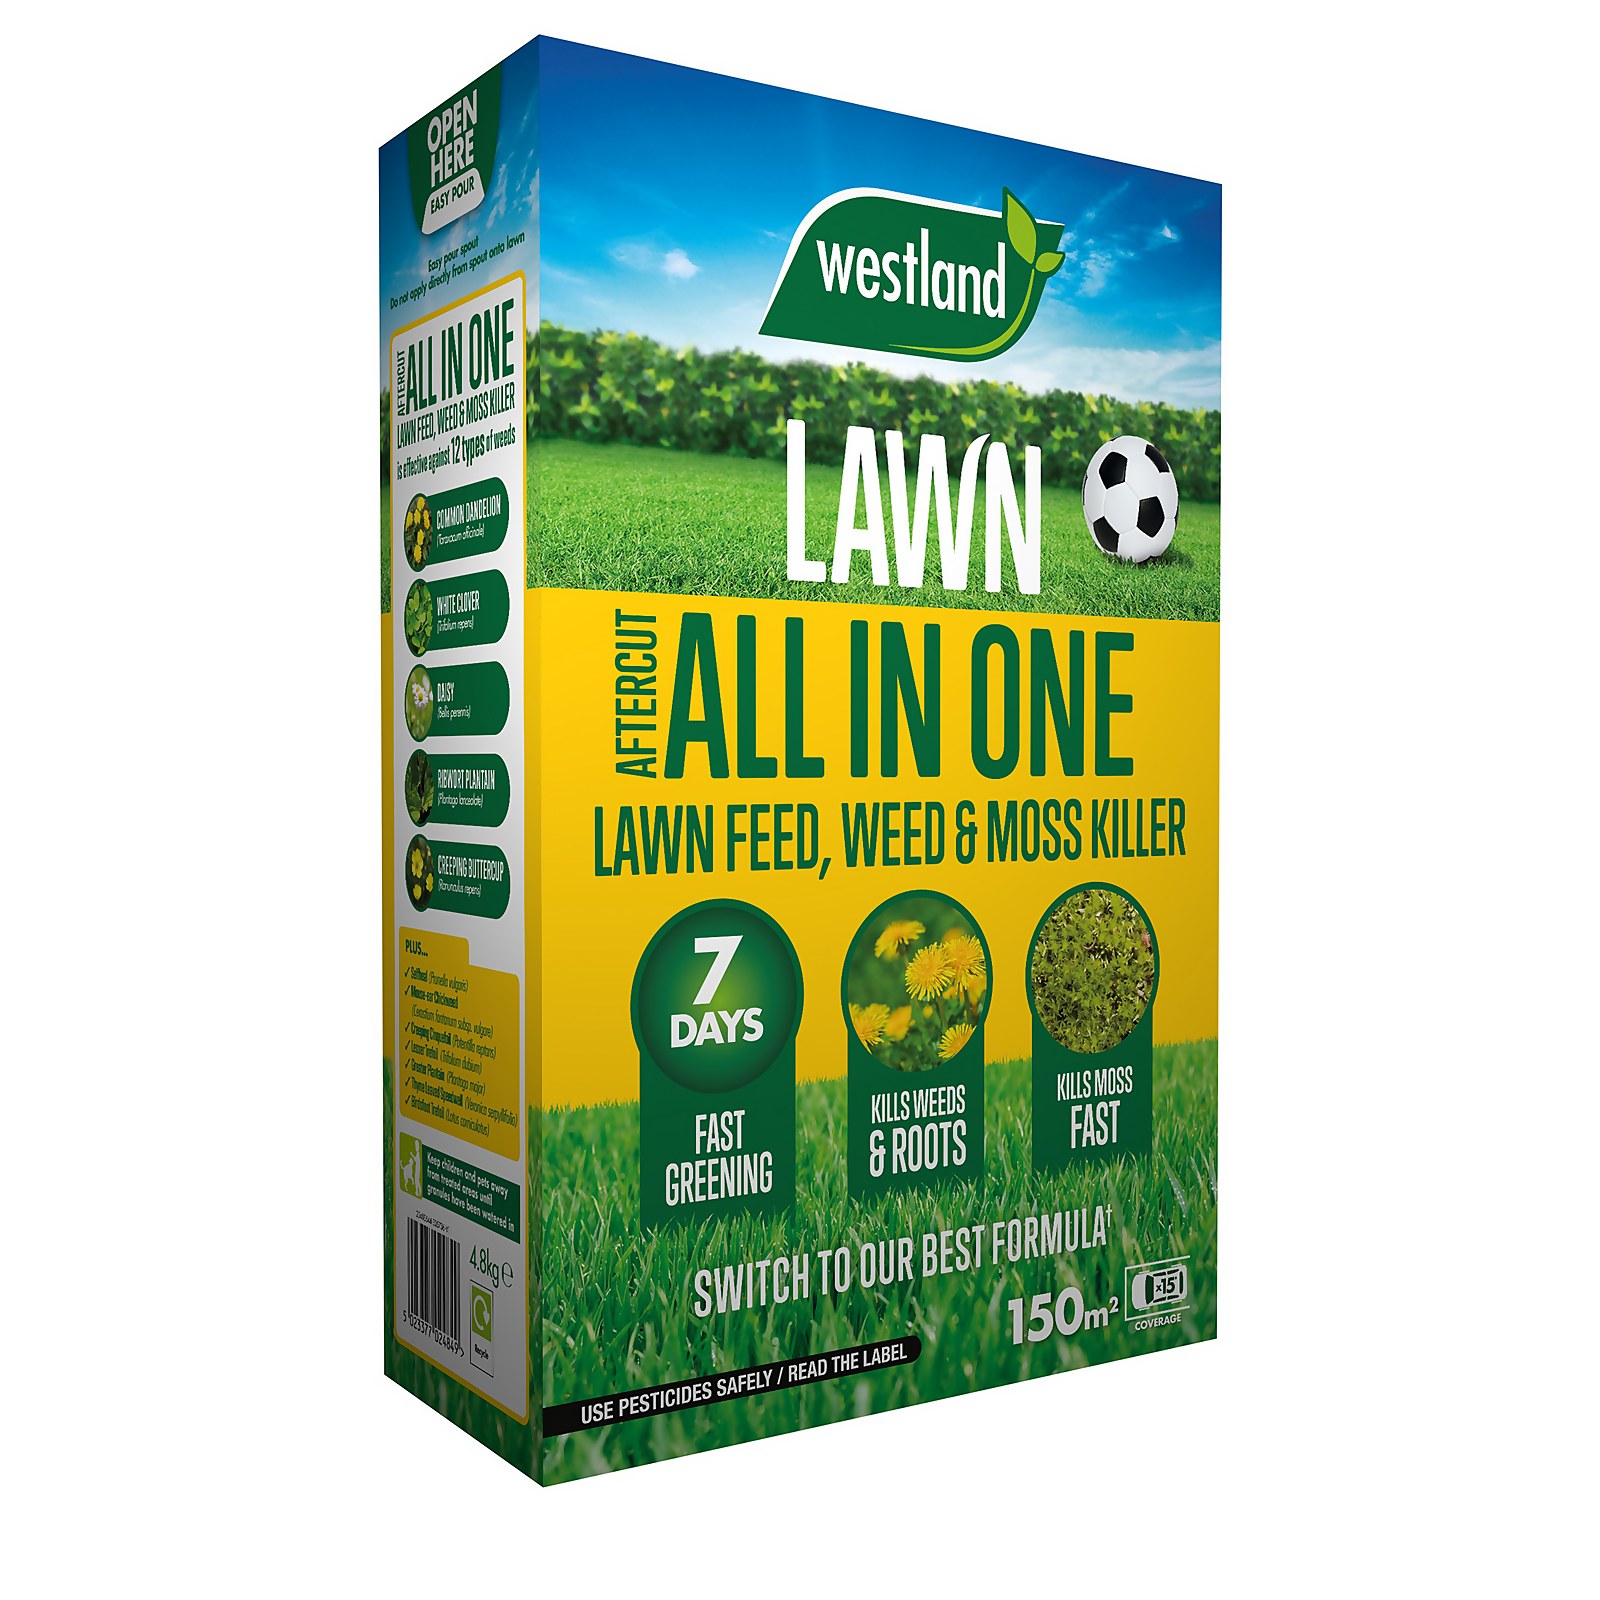 Aftercut All-In-One Lawn Feed, Weed & Moss Killer - 150m²